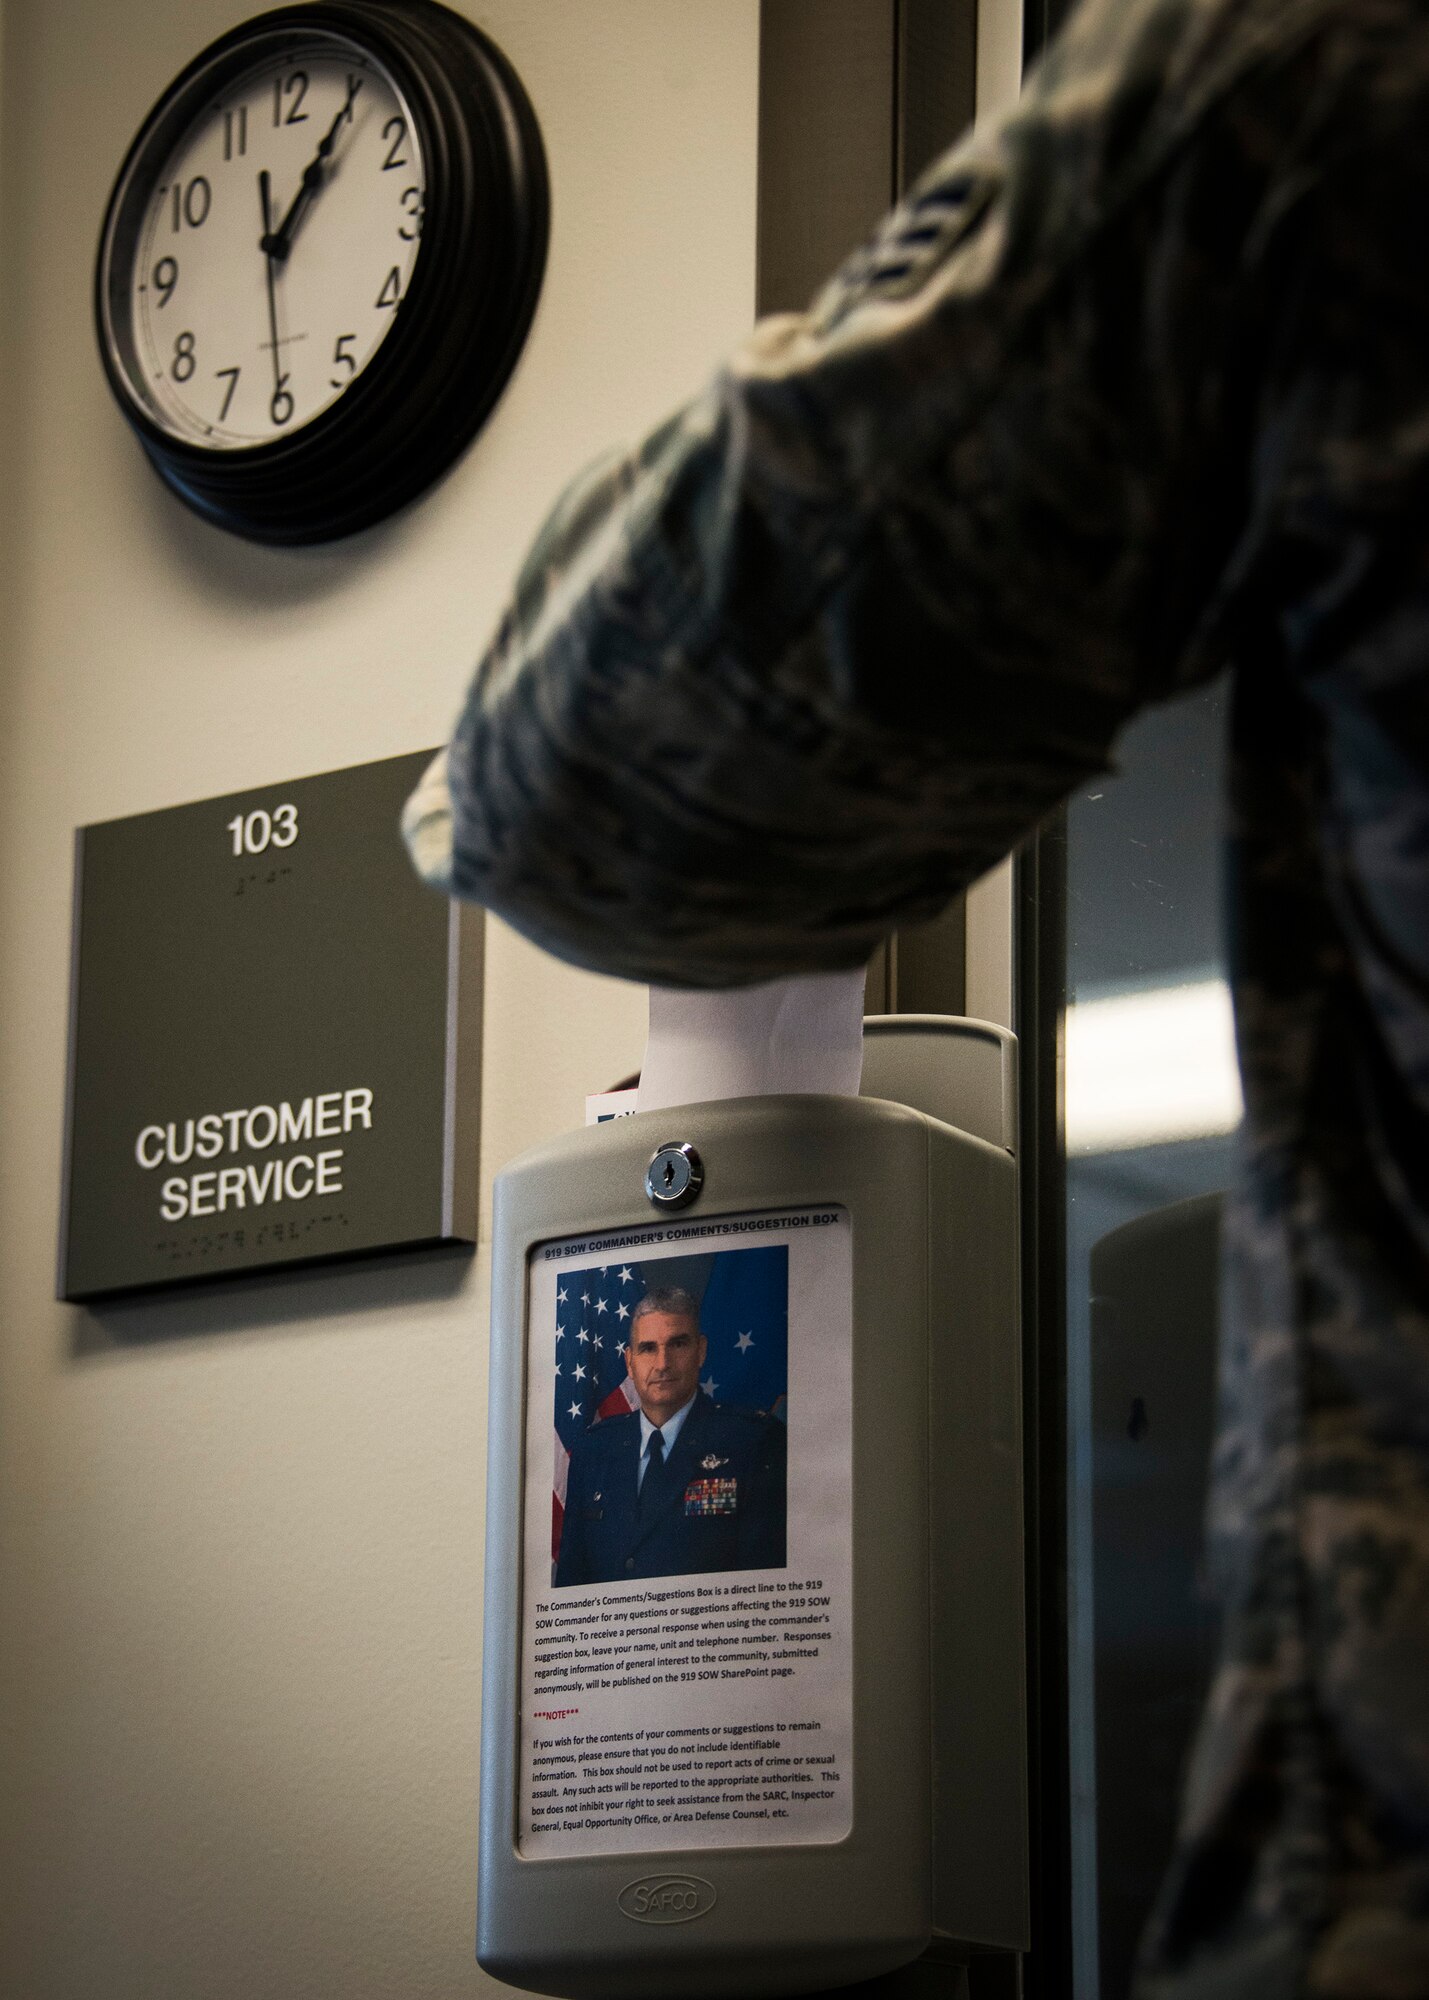 Col. James Phillips, 919th Special Operating Wing commander, has a direct line made available to all personnel through the use of suggestion boxes placed throughout the base such as the dining facility, gym, and customer service.  To receive a personal response when using the commander's suggestion box, leave your name, unit, and telephone number.  Responses regarding information of general interest to the community, submited anonymously, will be published on the 919th SOW SharePoint page. (U.S. Air Force photo/Tech. Sgt. Jasmin Taylor)